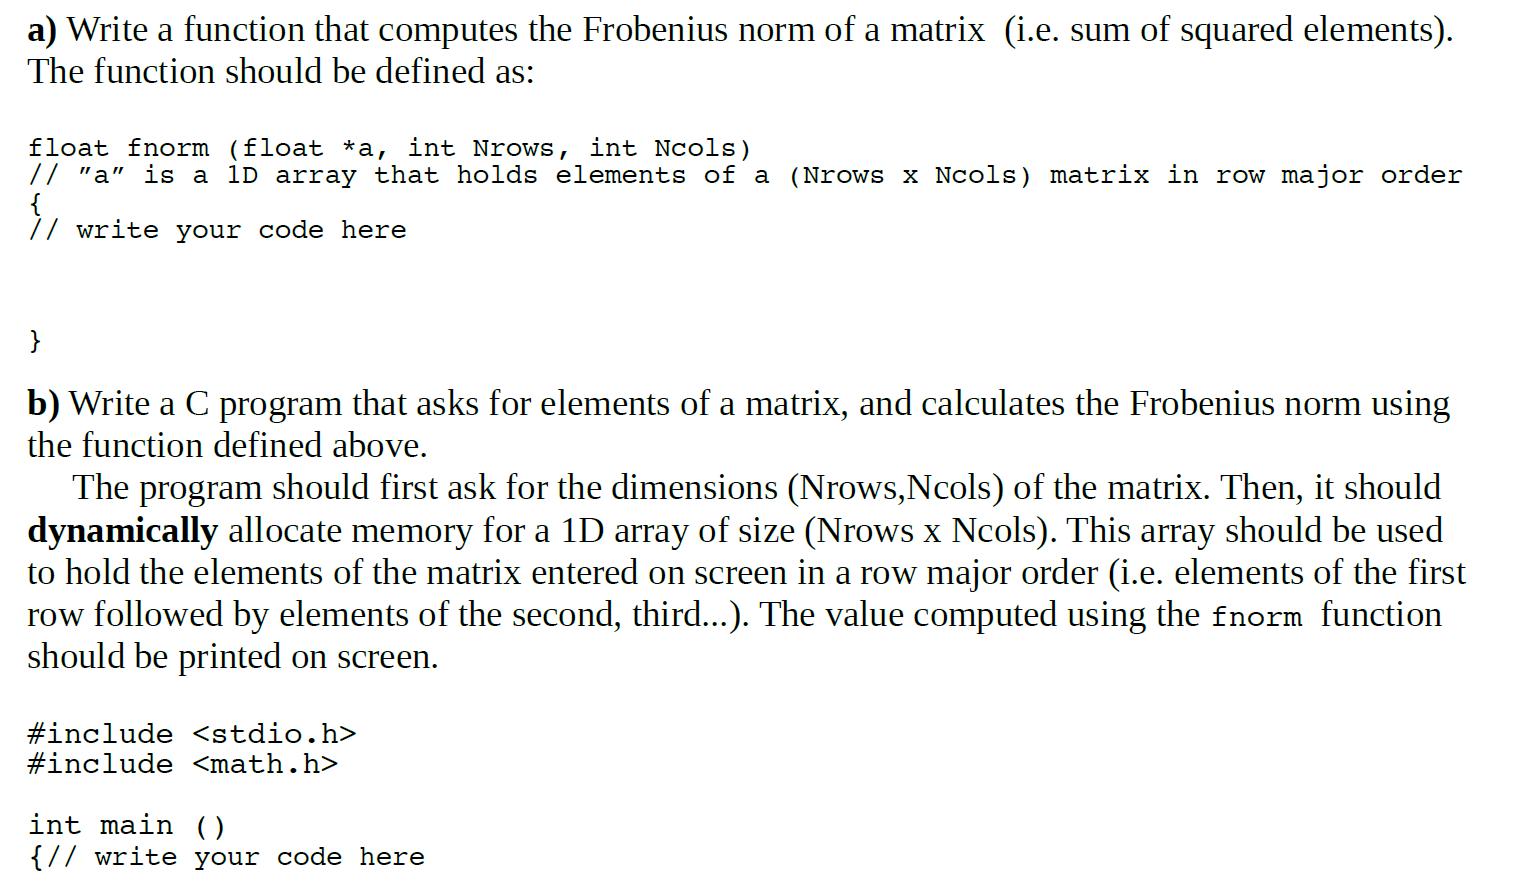 a) Write a function that computes the Frobenius norm of a matrix (i.e. sum of squared elements). The function